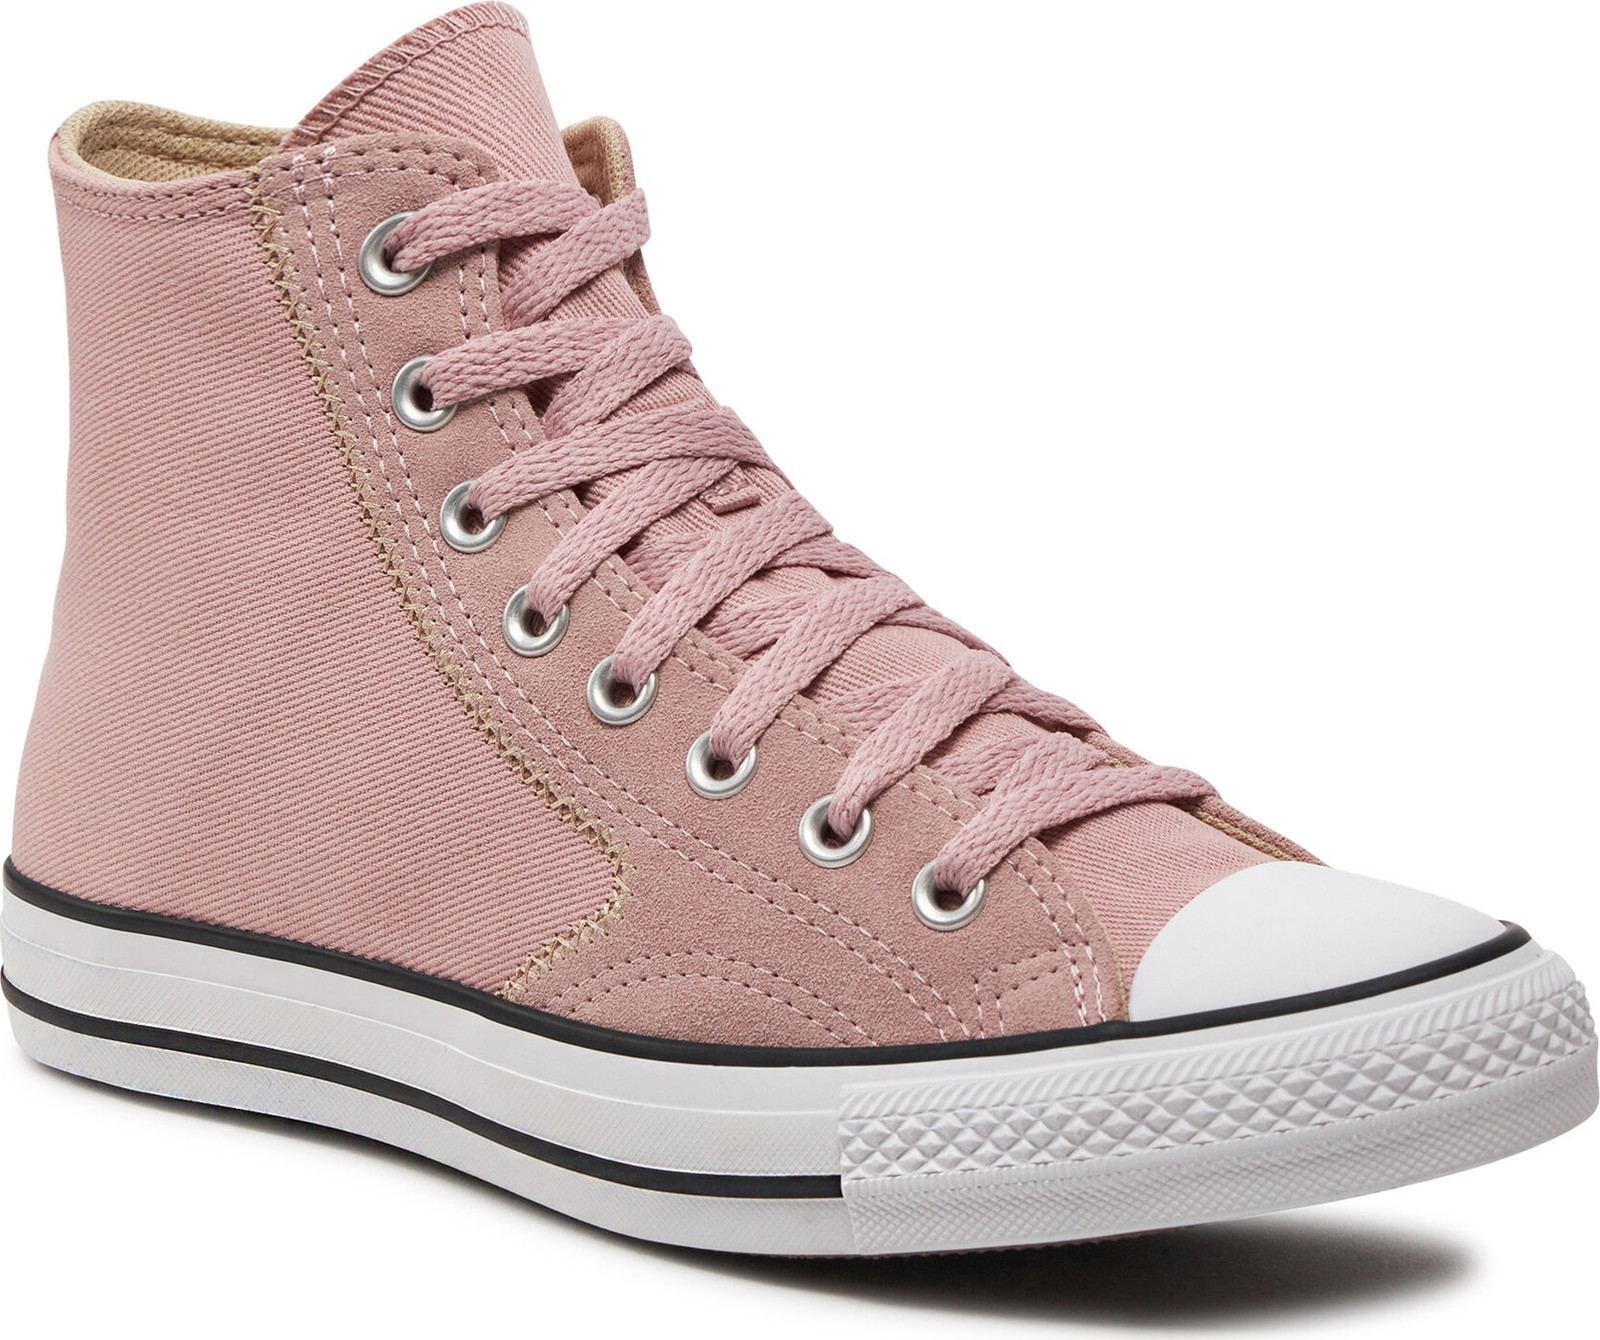 Plátěnky Converse Chuck Taylor All Star Mixed Materials A06573C Static Pink/Nutty Granola